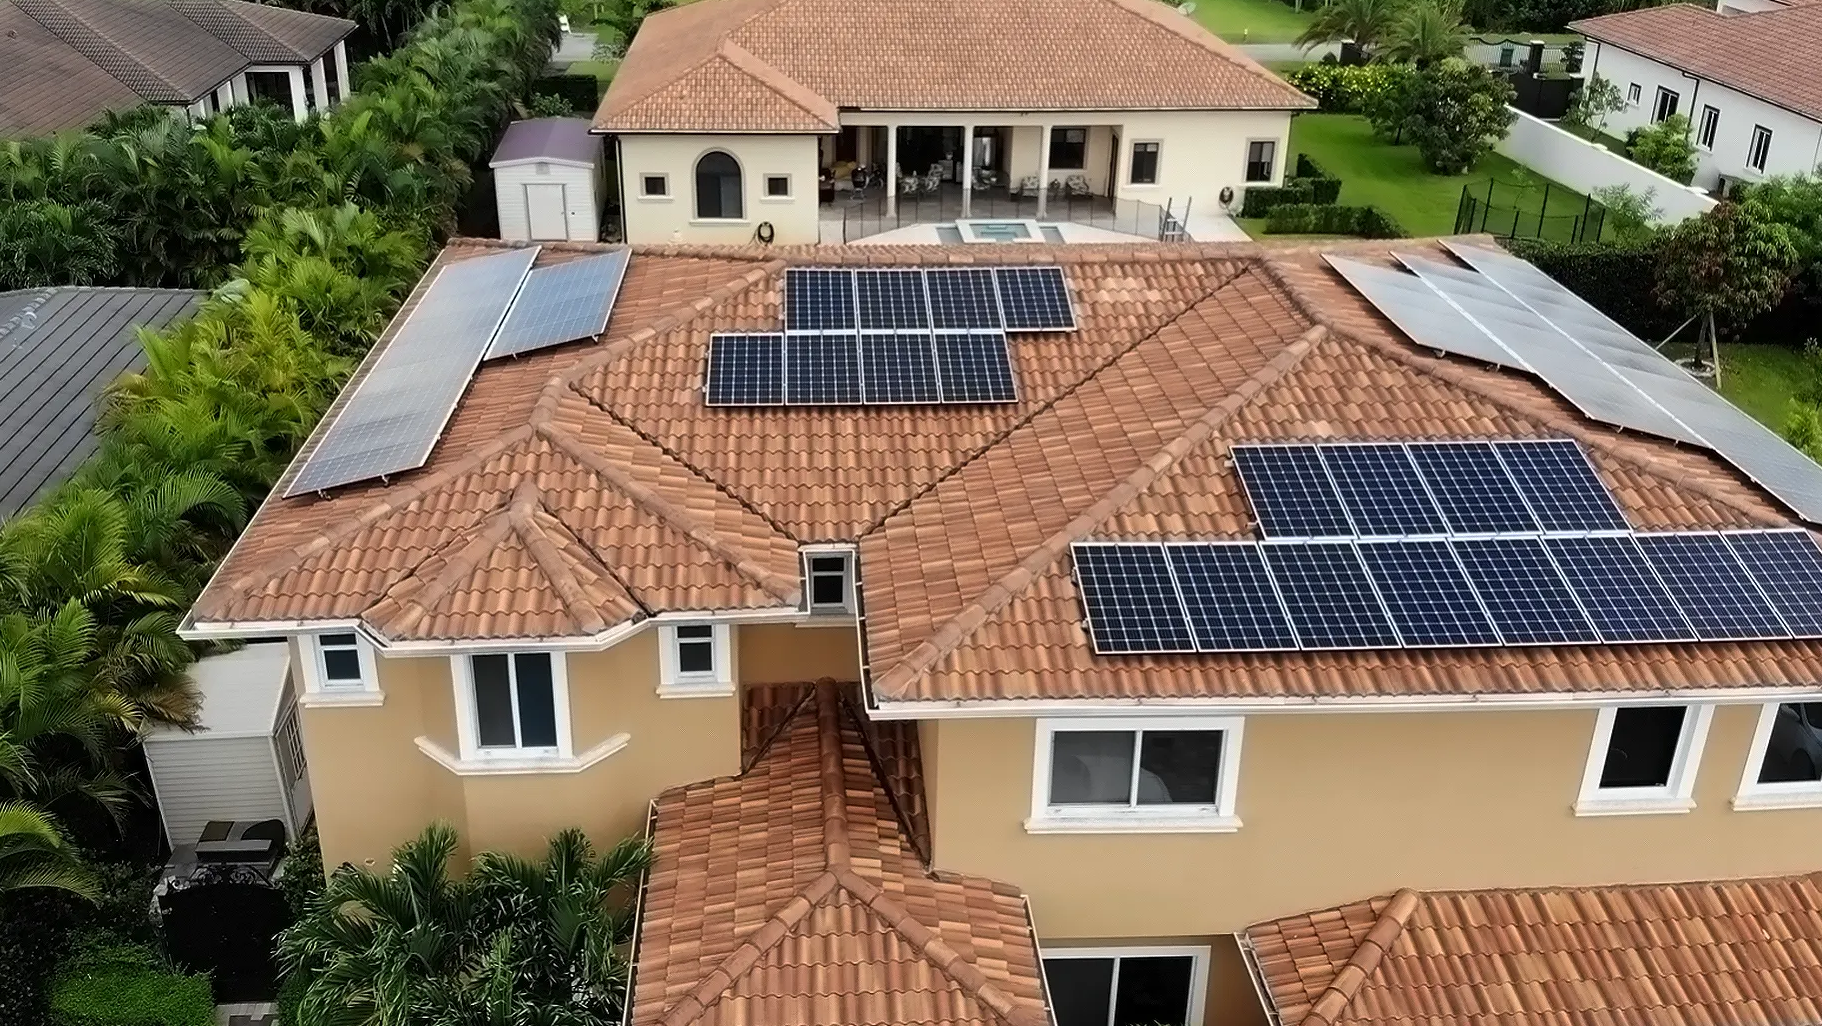 Top Coral Gables Solar Installation Firm Offers Affordable Systems For Your Home